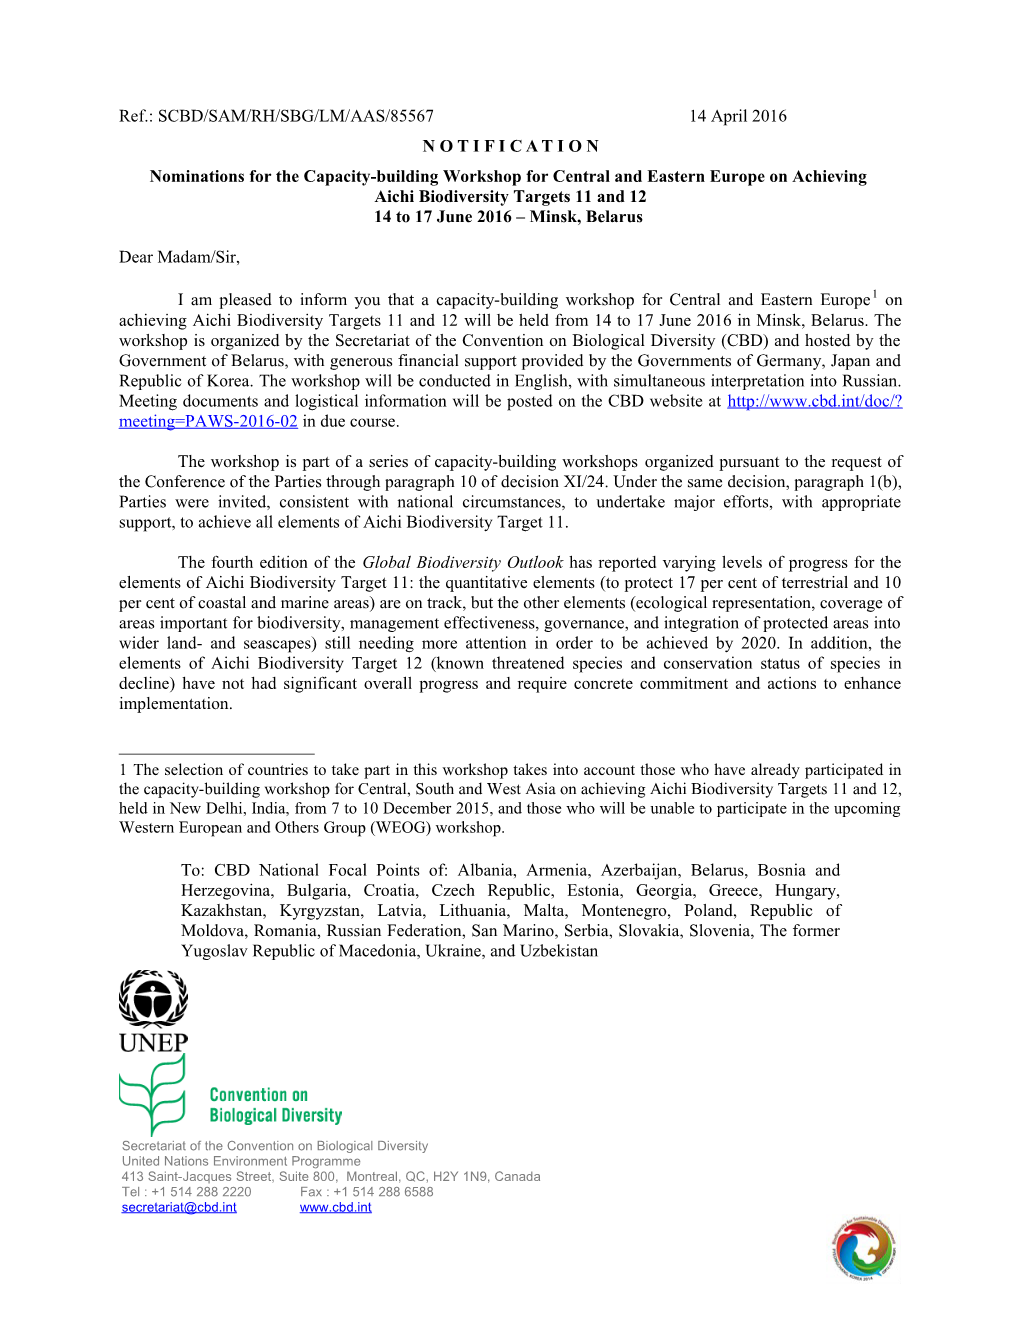 Nominations for the Capacity-Building Workshop for Central and Eastern Europe on Achieving